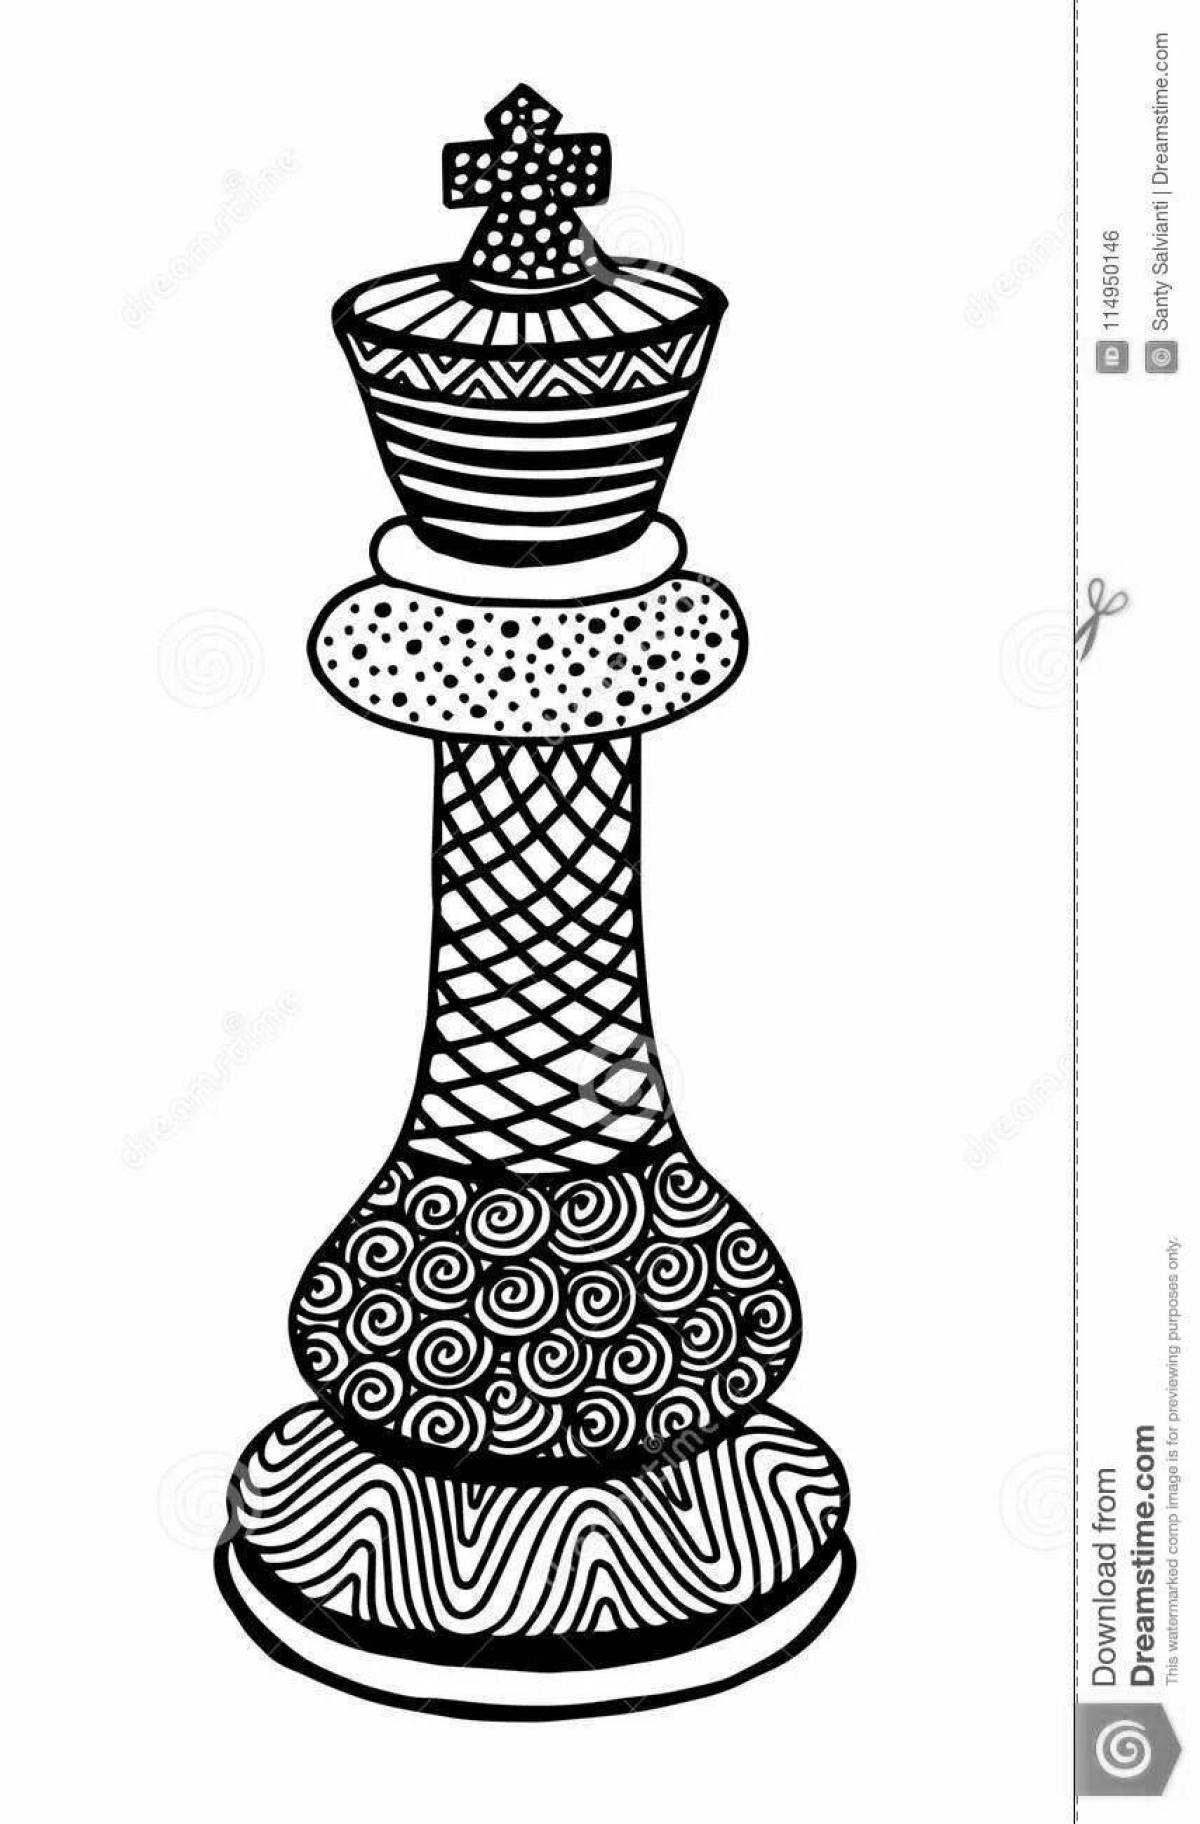 Coloring page dazzling chess king